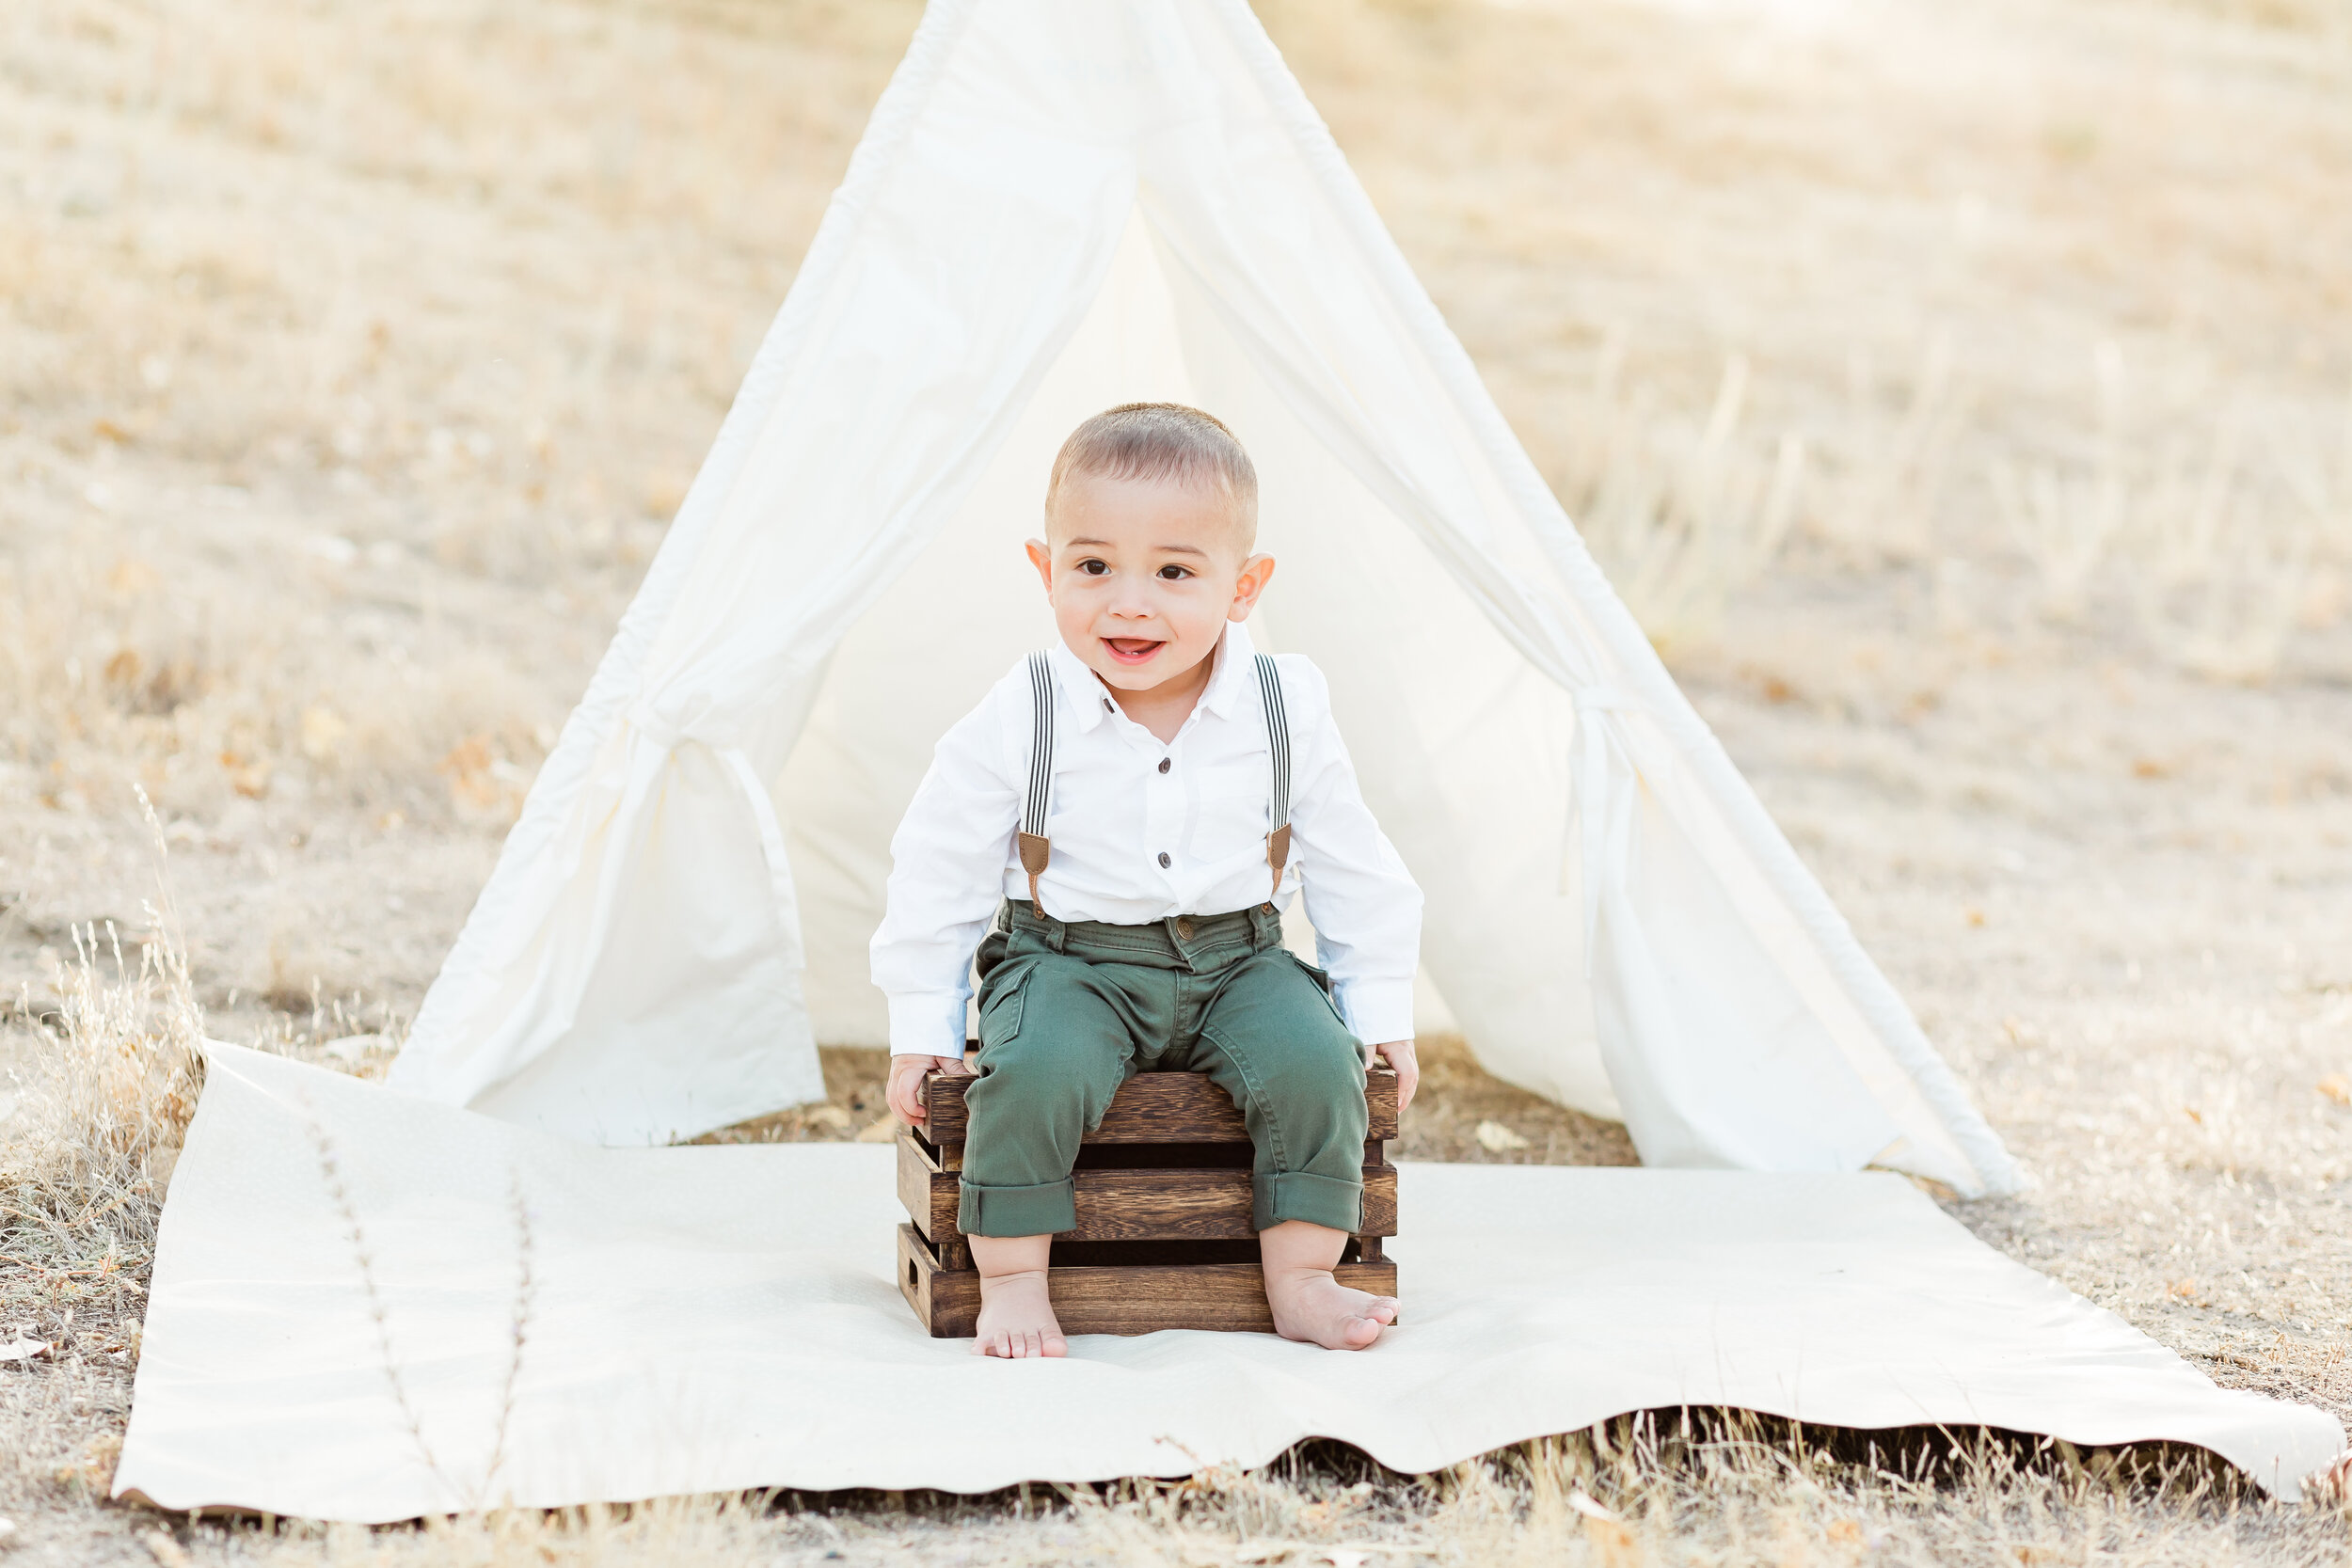 Cake Smash photo session, one year old boy wearing green pants and suspenders poses in front of a tee pee tent.